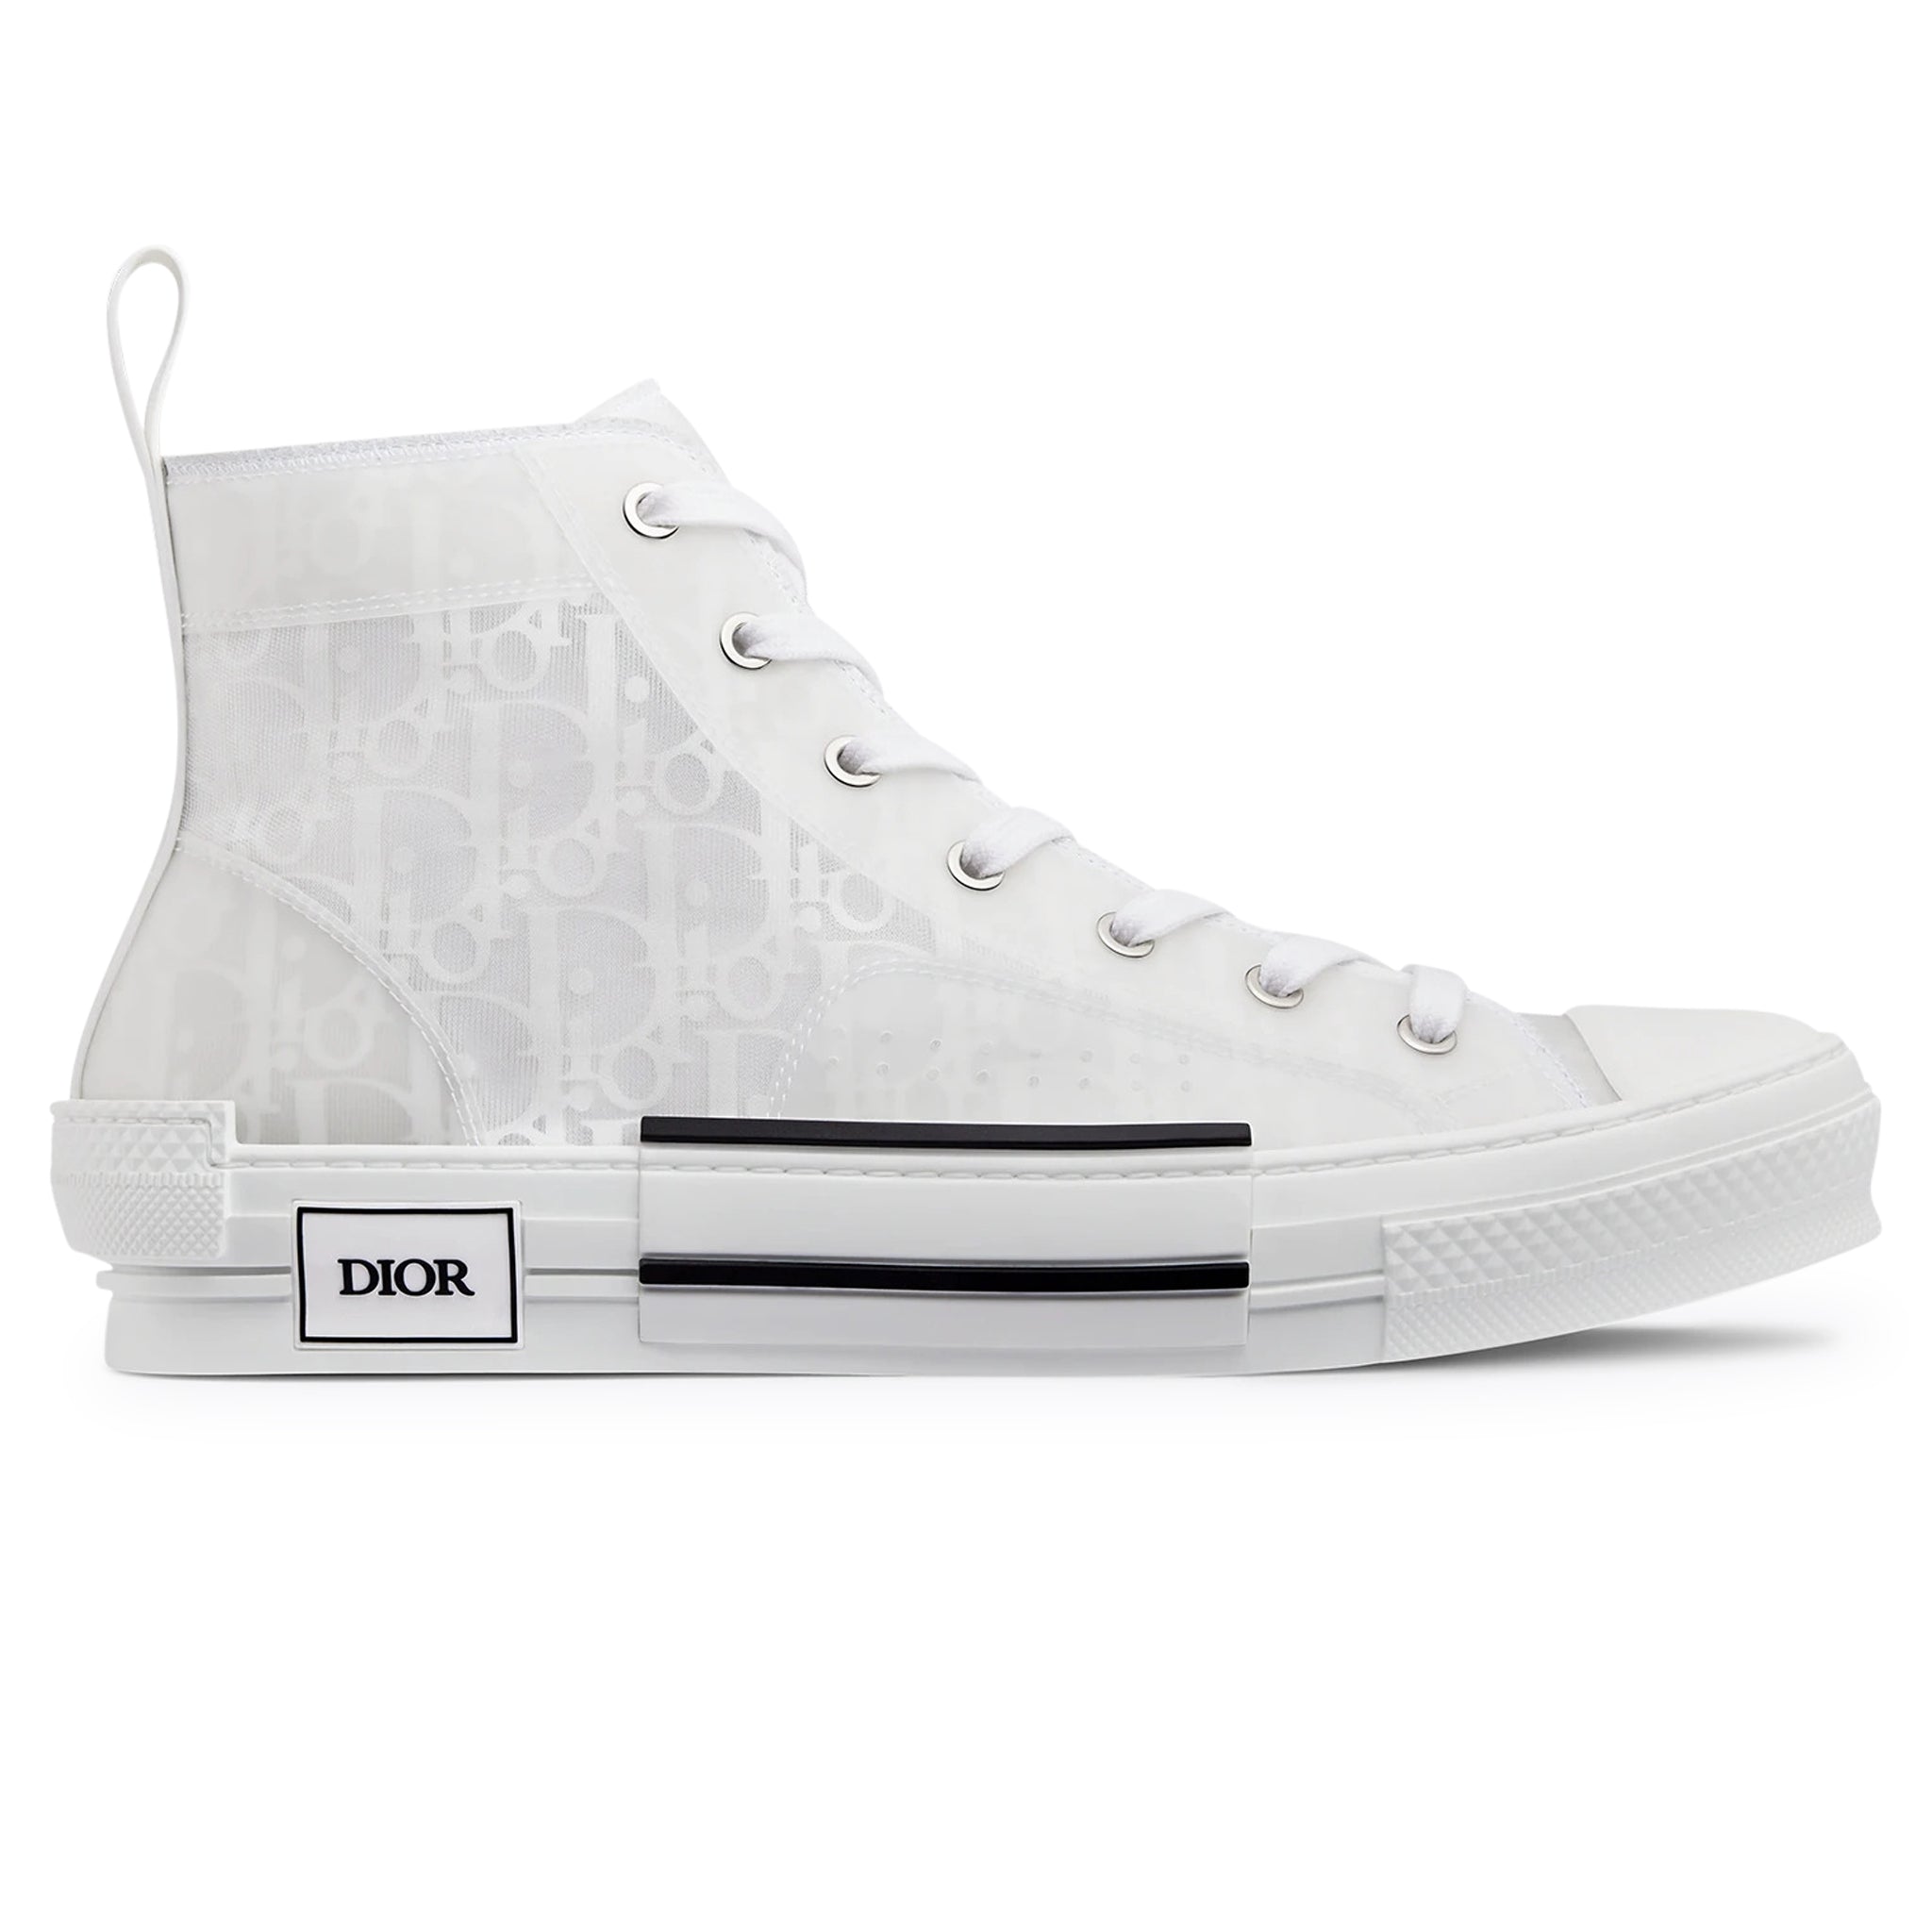 Take Another Look at the Shawn Stussy x Dior B23 Sneakers